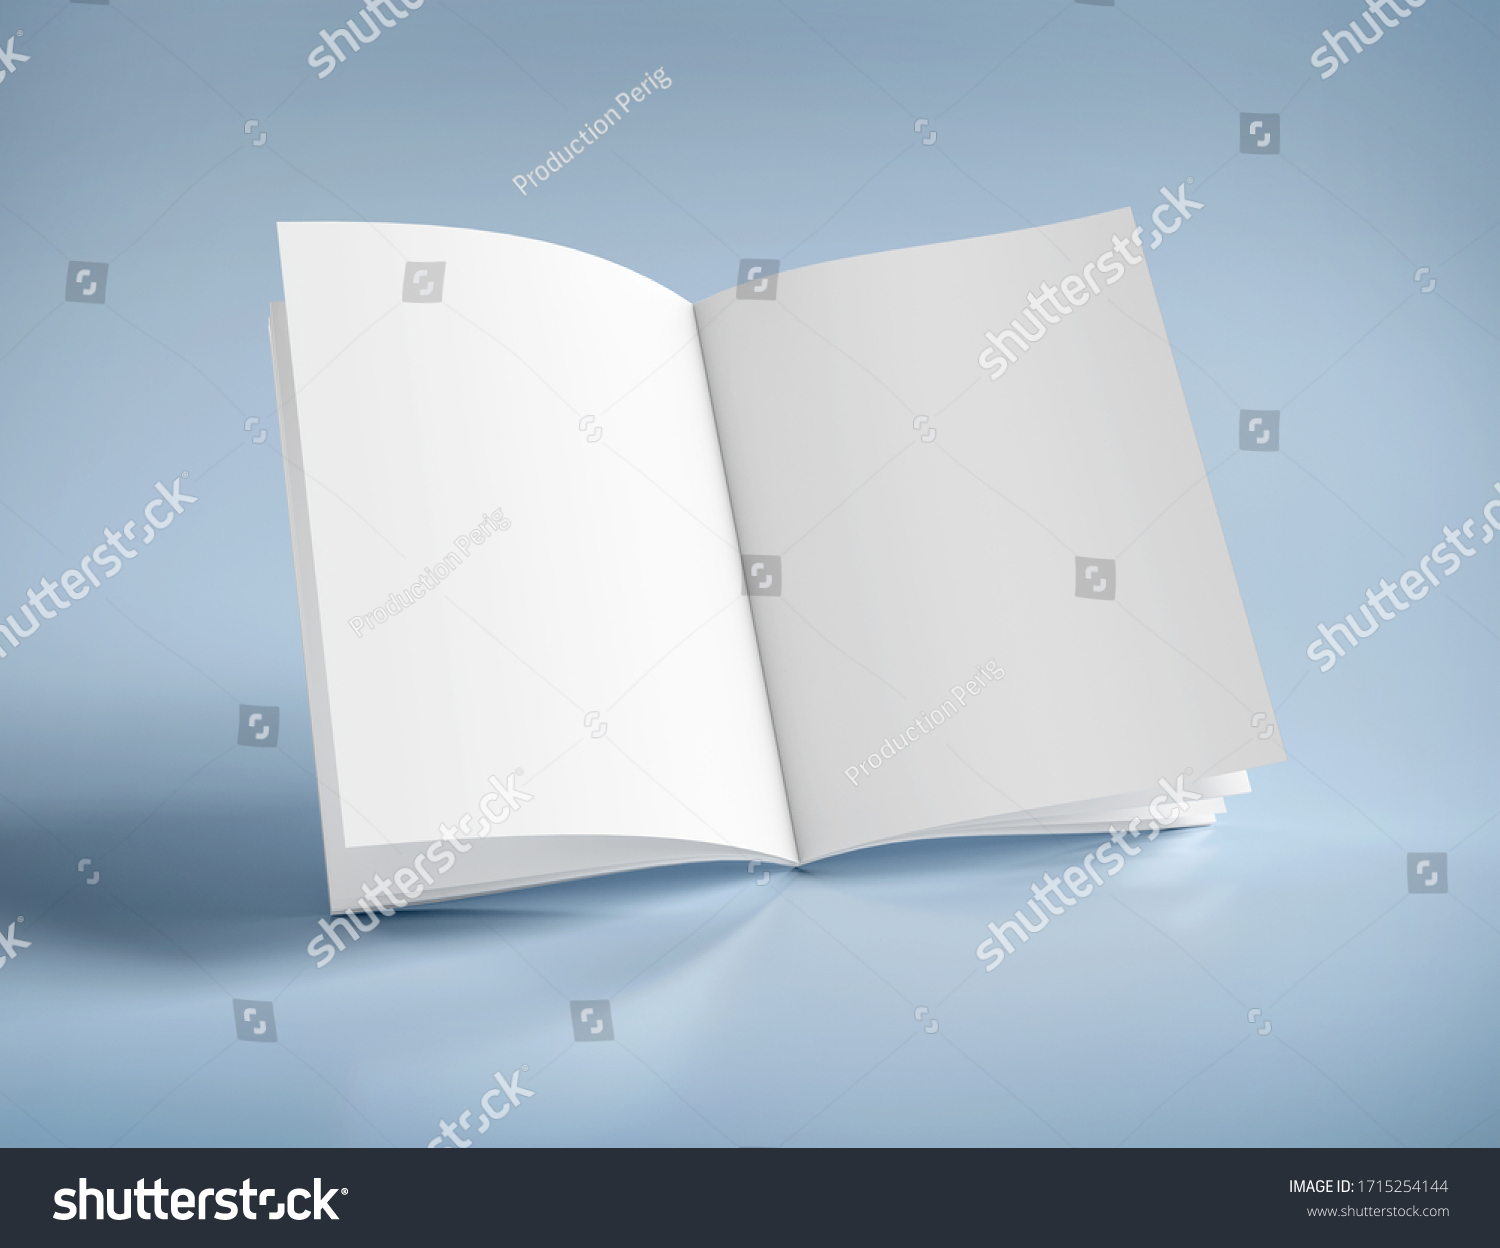 Mock up view of an open magazine - 3d rendering #1715254144